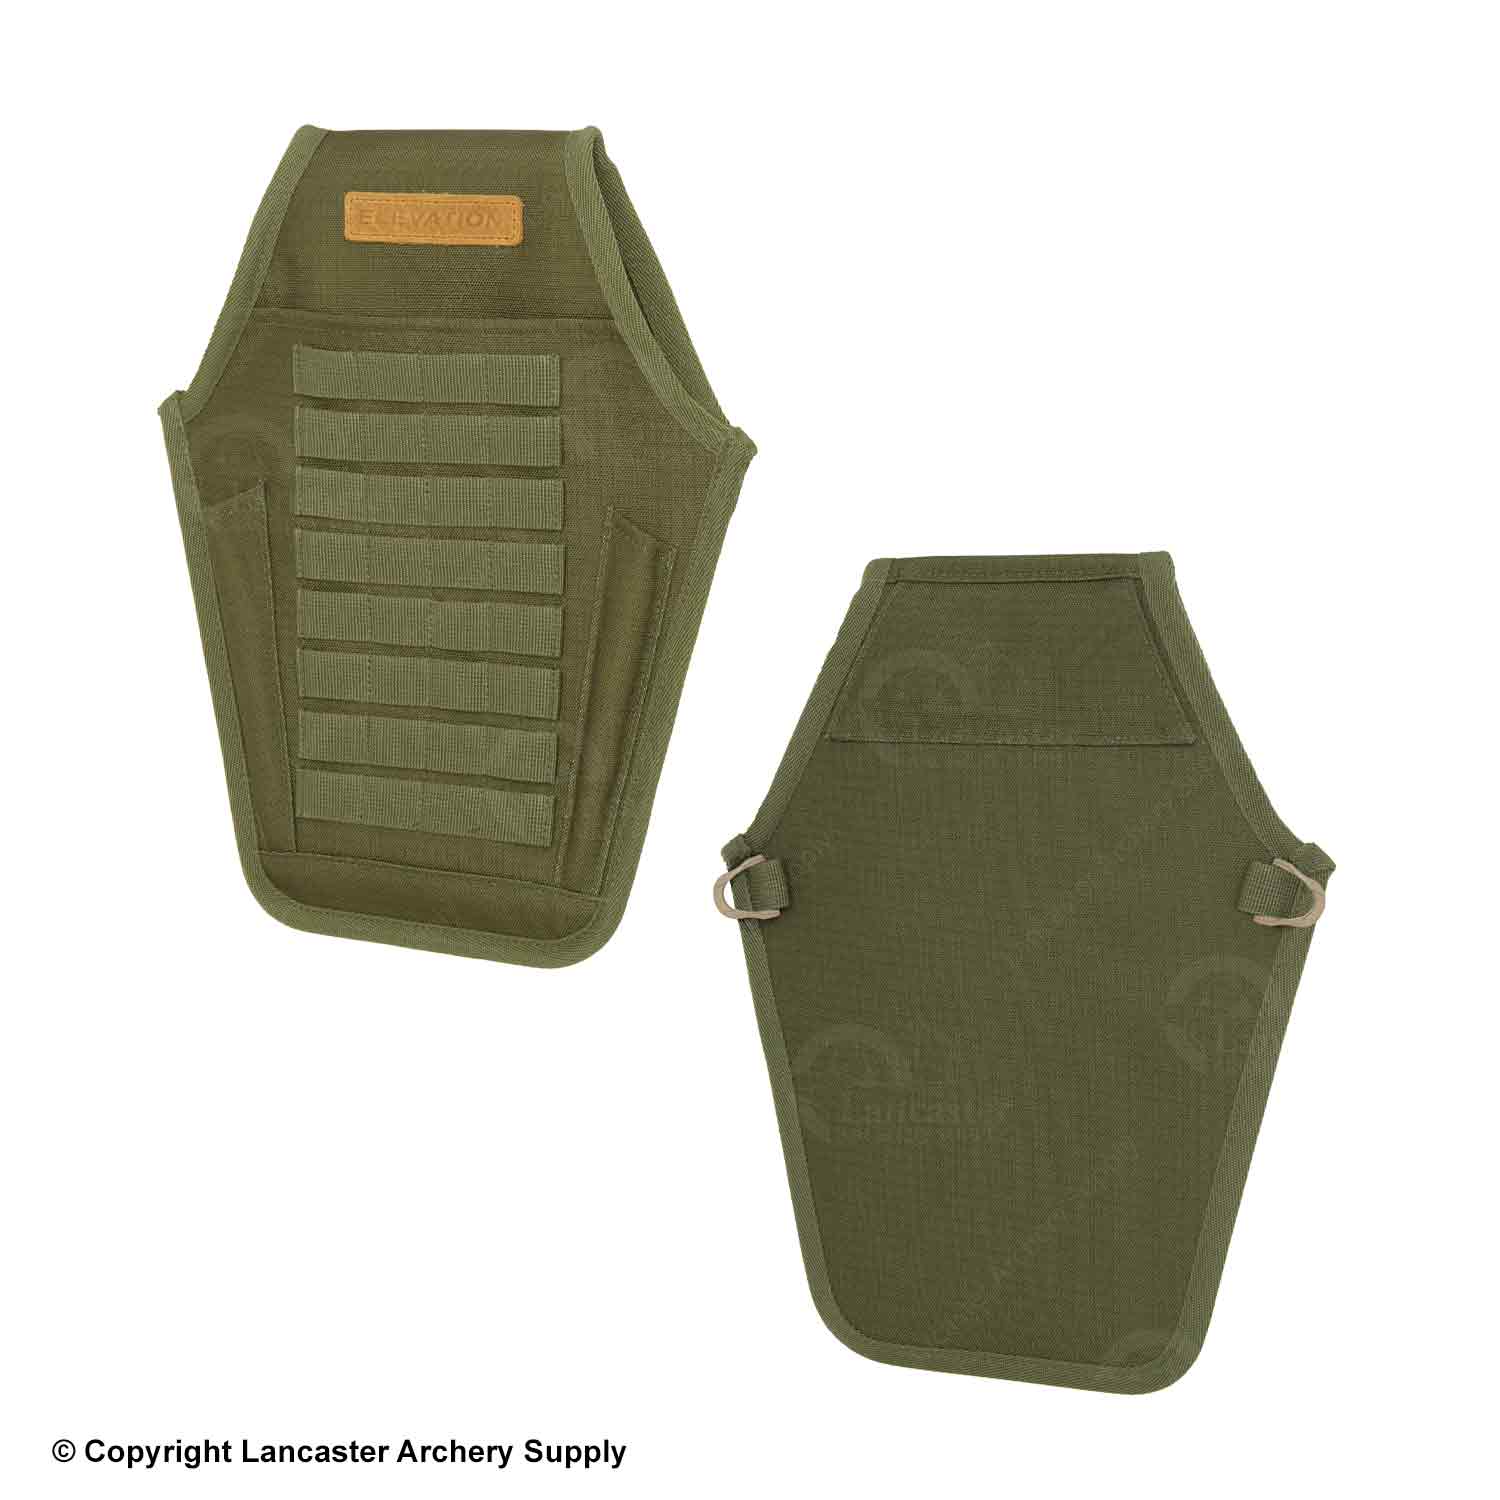 Elevation Terra MGS Sleeve Quiver